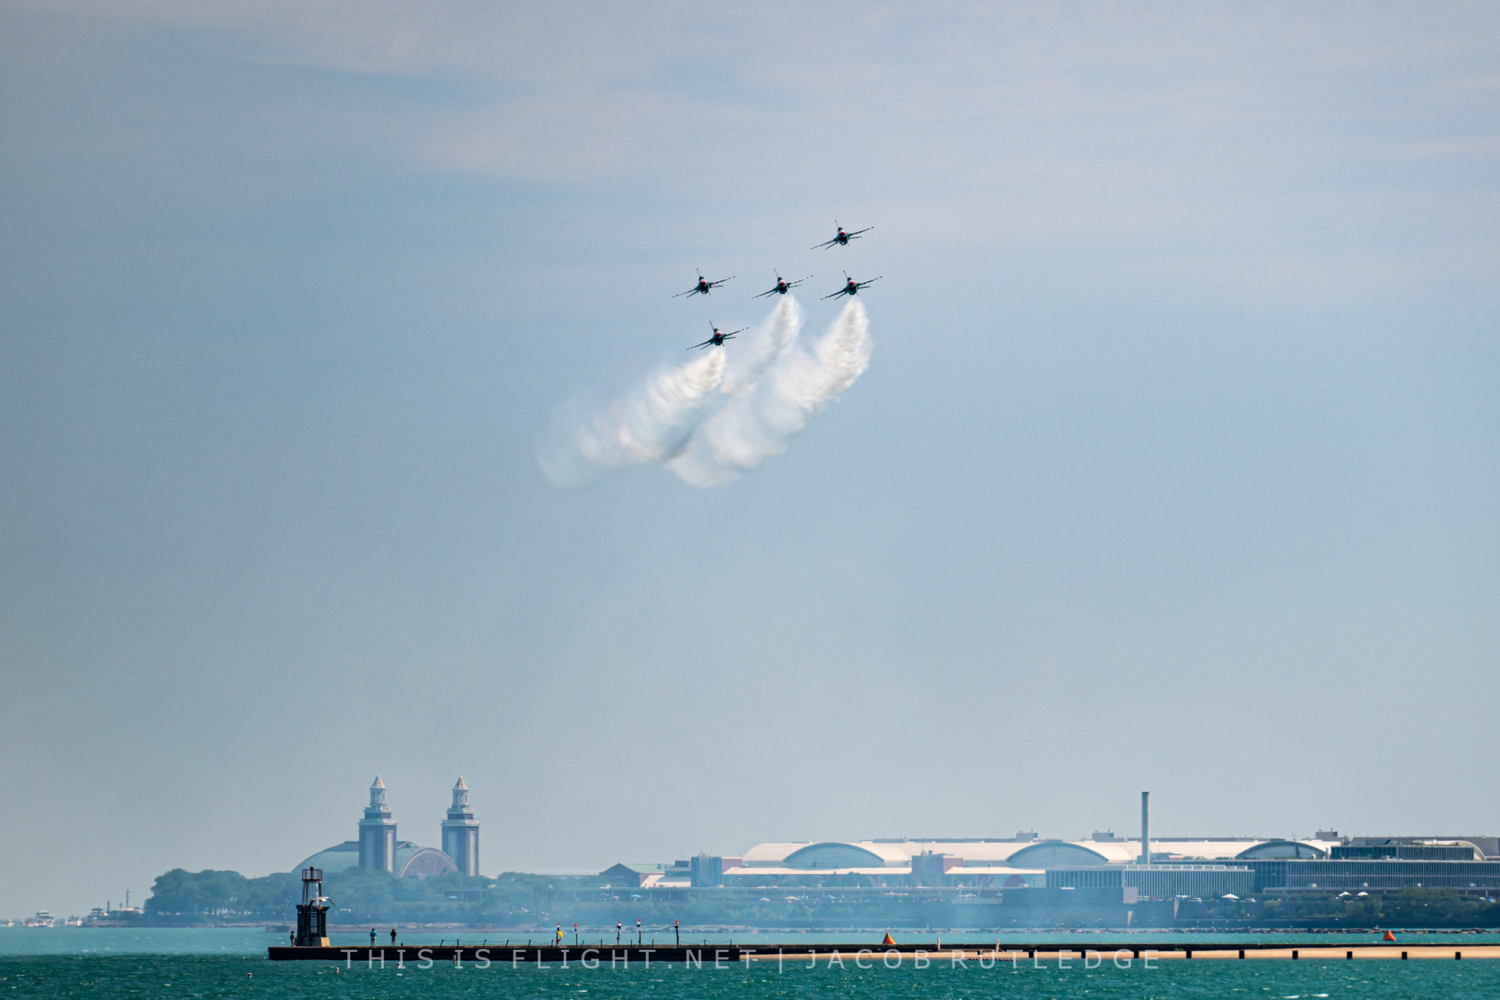 City of Chicago :: Chicago Air and Water Show